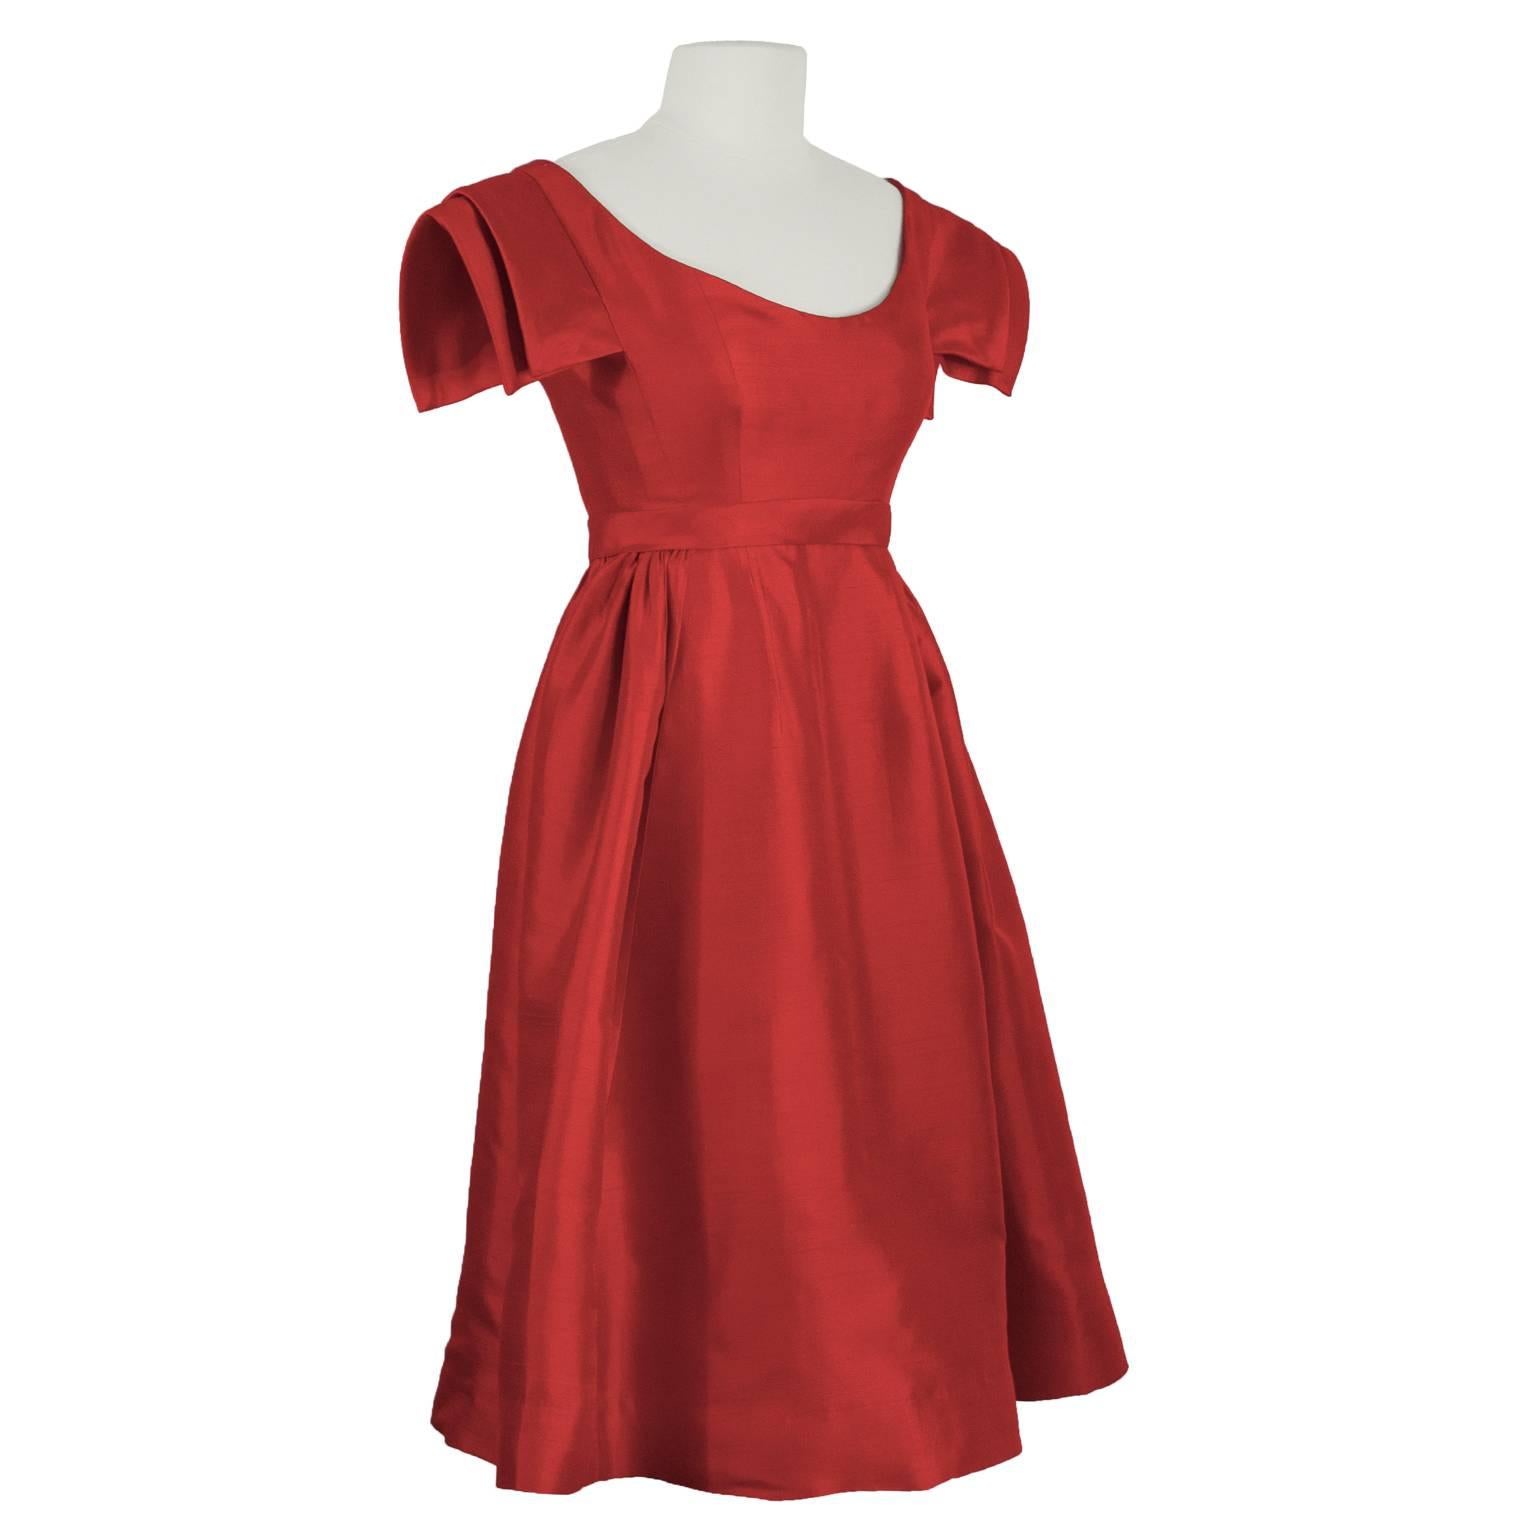 1960's Galanos demi couture iridescent red silk shantung cocktail dress. Features an empire waistline with a scoop neck and double layer structured capped sleeves. Gathering at the sides. Zipper at the back. In excellent condition. Fits like a US